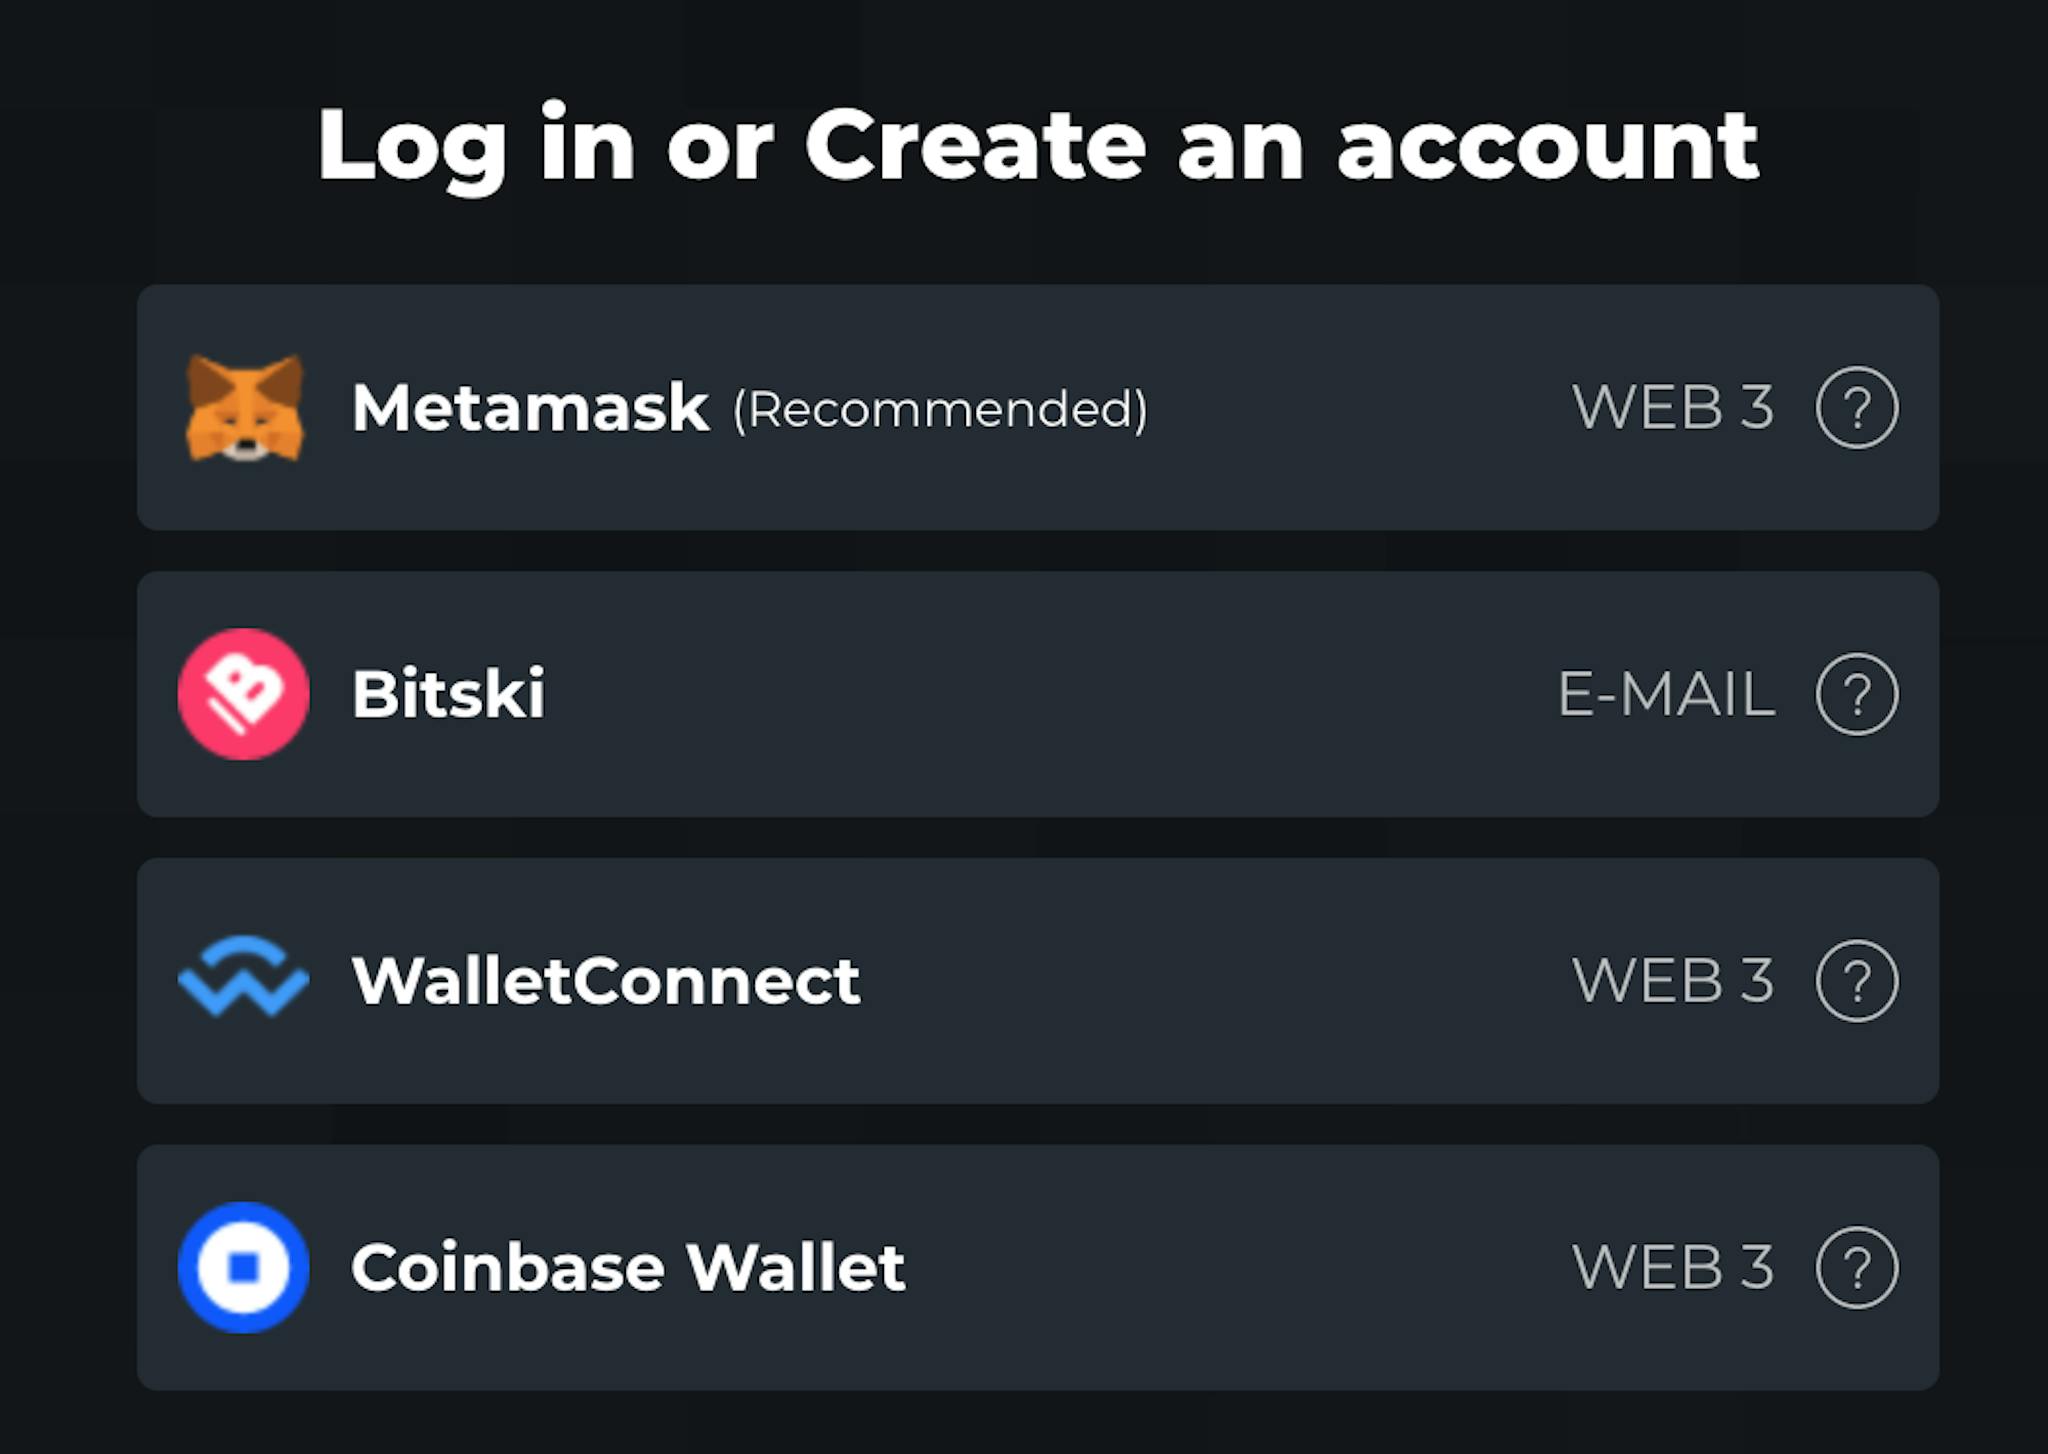 Figure 2. The Web3 wallet interface from a website.